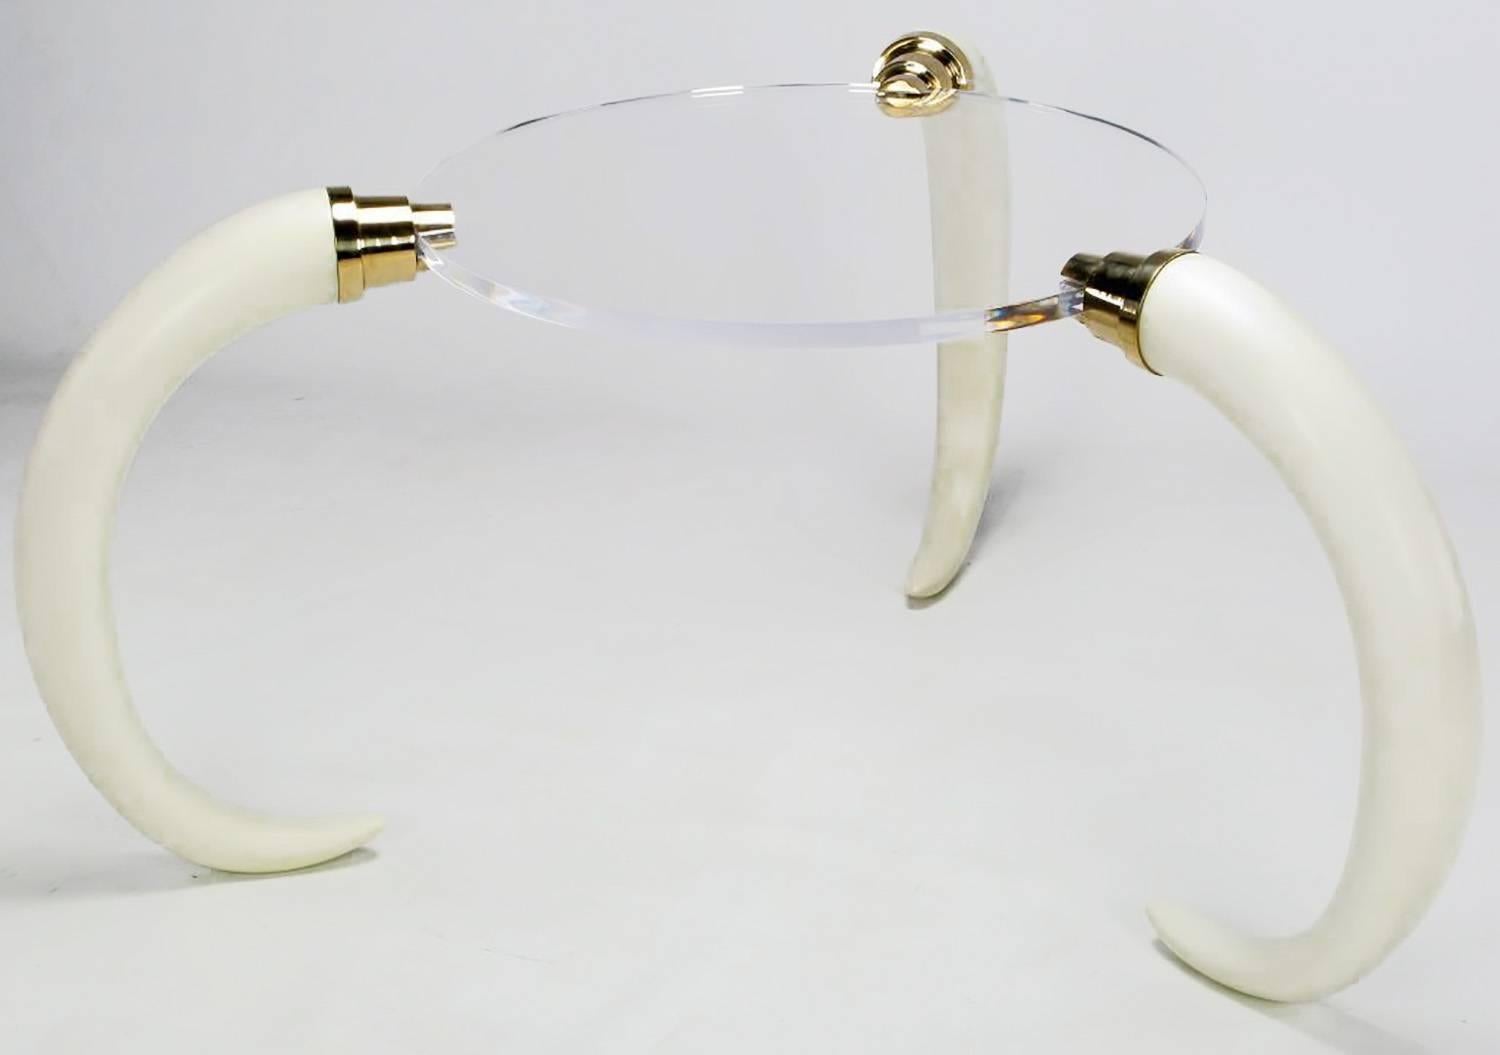 A one-of-a-kind center table consisting of three faux elephant tusks with heavy brass hardware and a 1